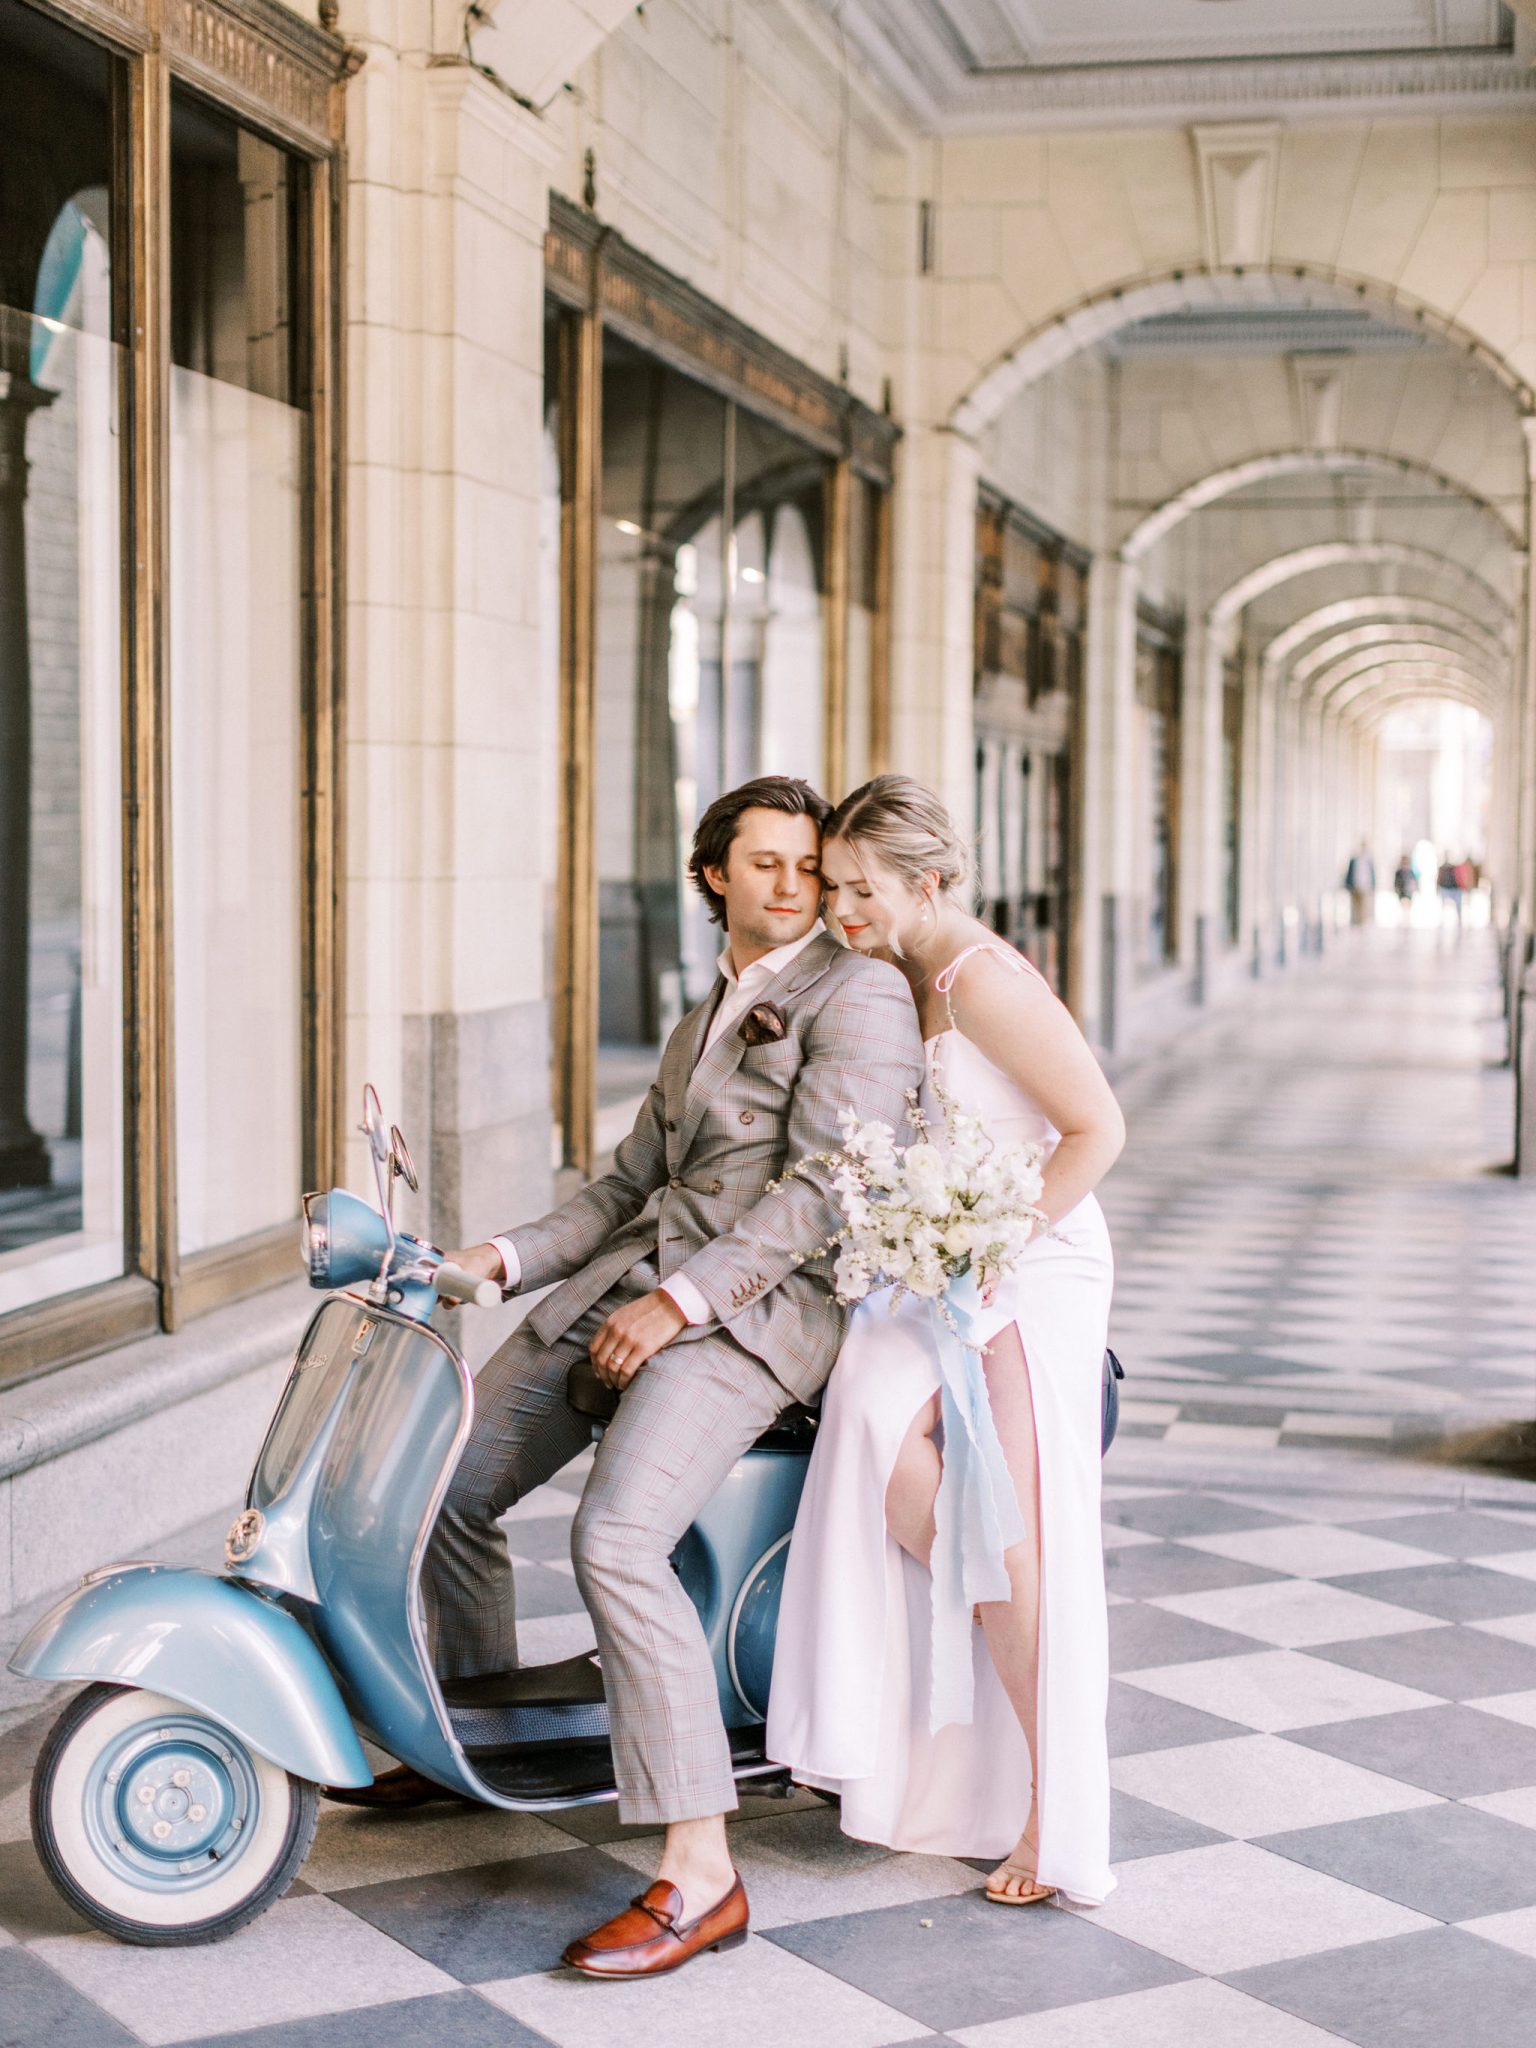 Modern downtown elopement with a white slip bridal gown, grey suit and blue rental vespa